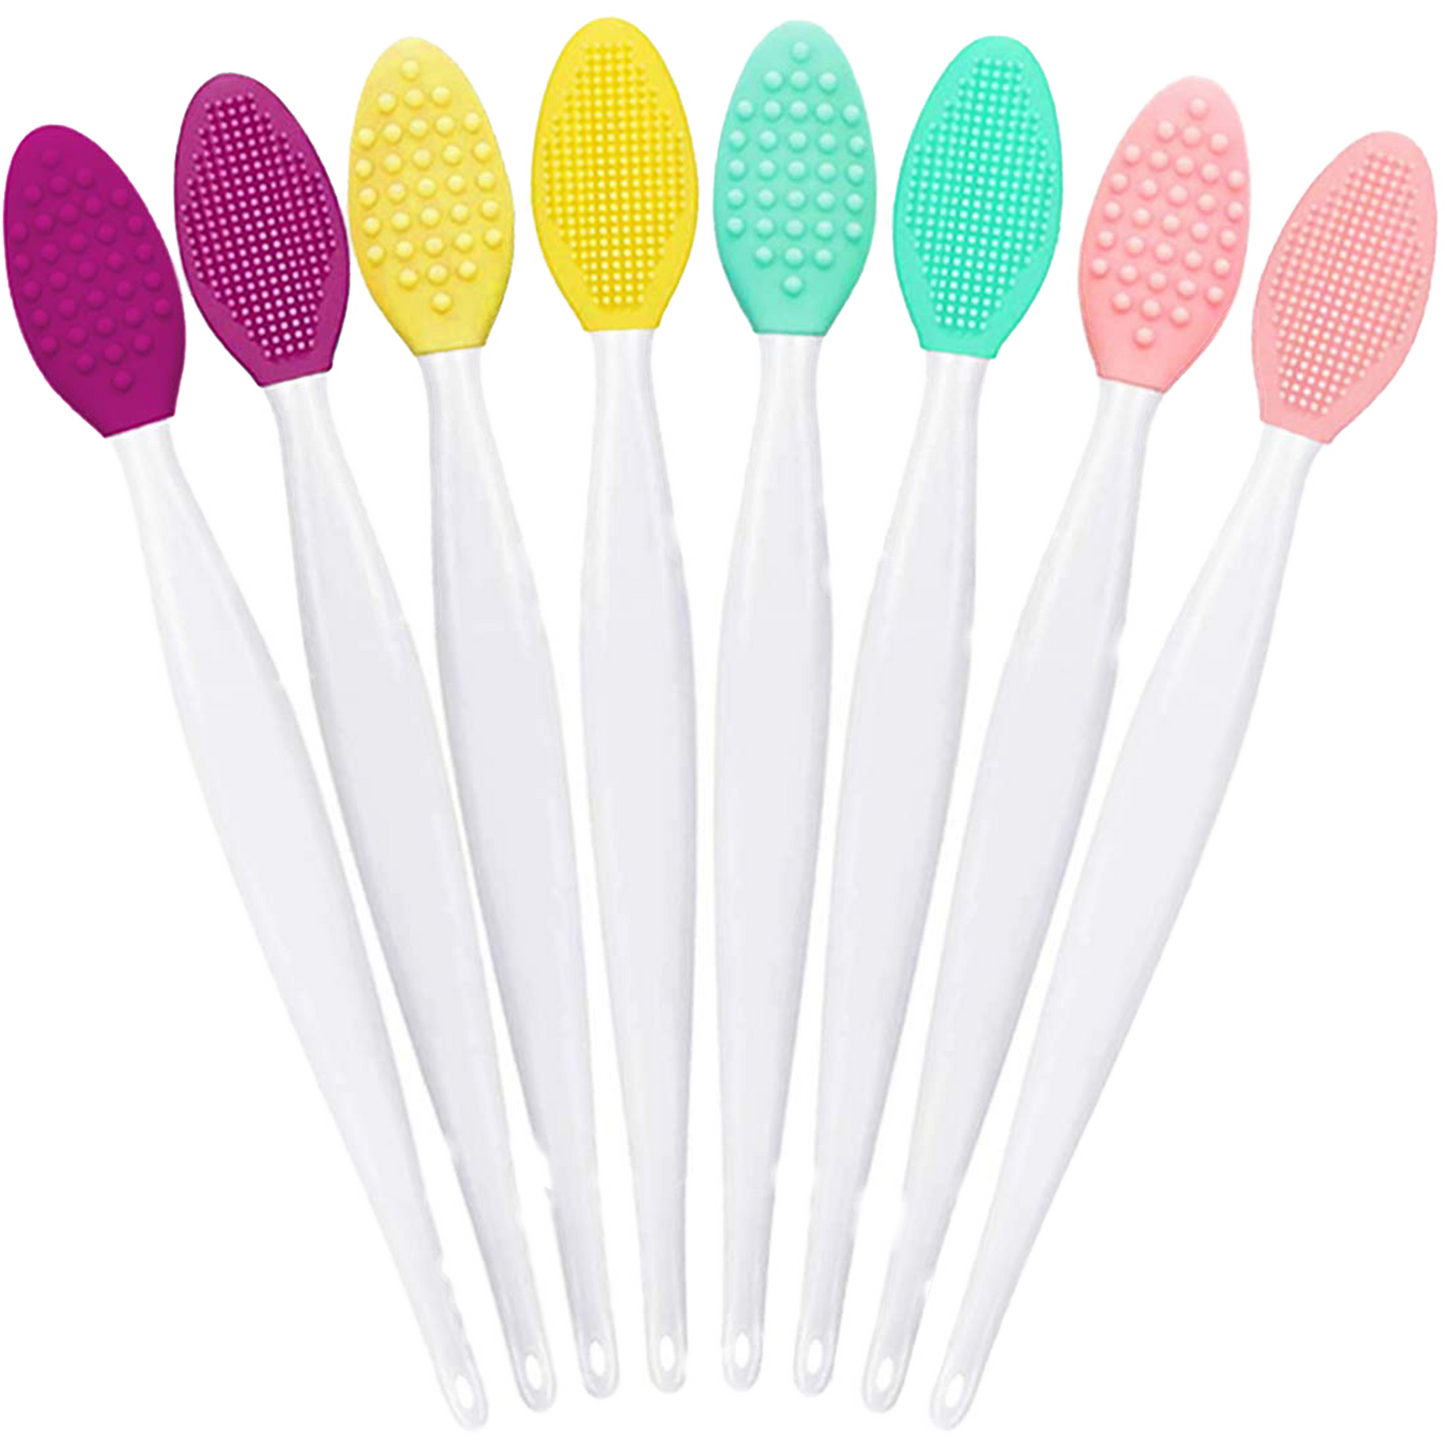 Lip Scrub Brush,2 in 1 Double-Sided Silicone Exfoliating Lip Brush Tool for Smoother and Fuller Lip Appearance (4PCS) | Habbie Beauty - Habbie Enterprise